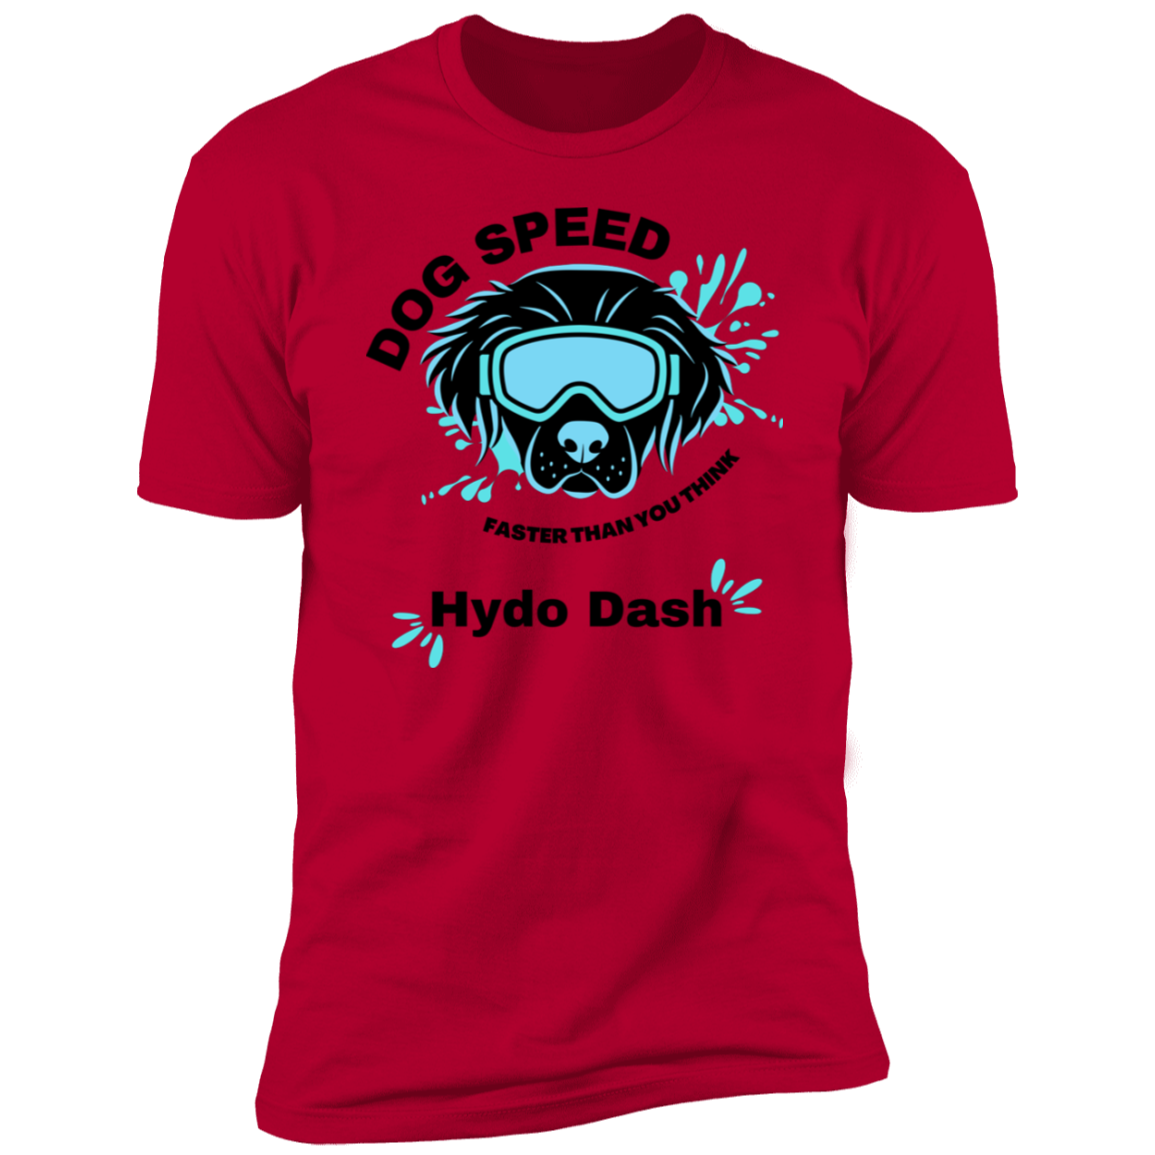 Dog Speed Faster Than You Think Hydro Dash T-shirt, Hydro Dash shirt dog shirt for humans, in red